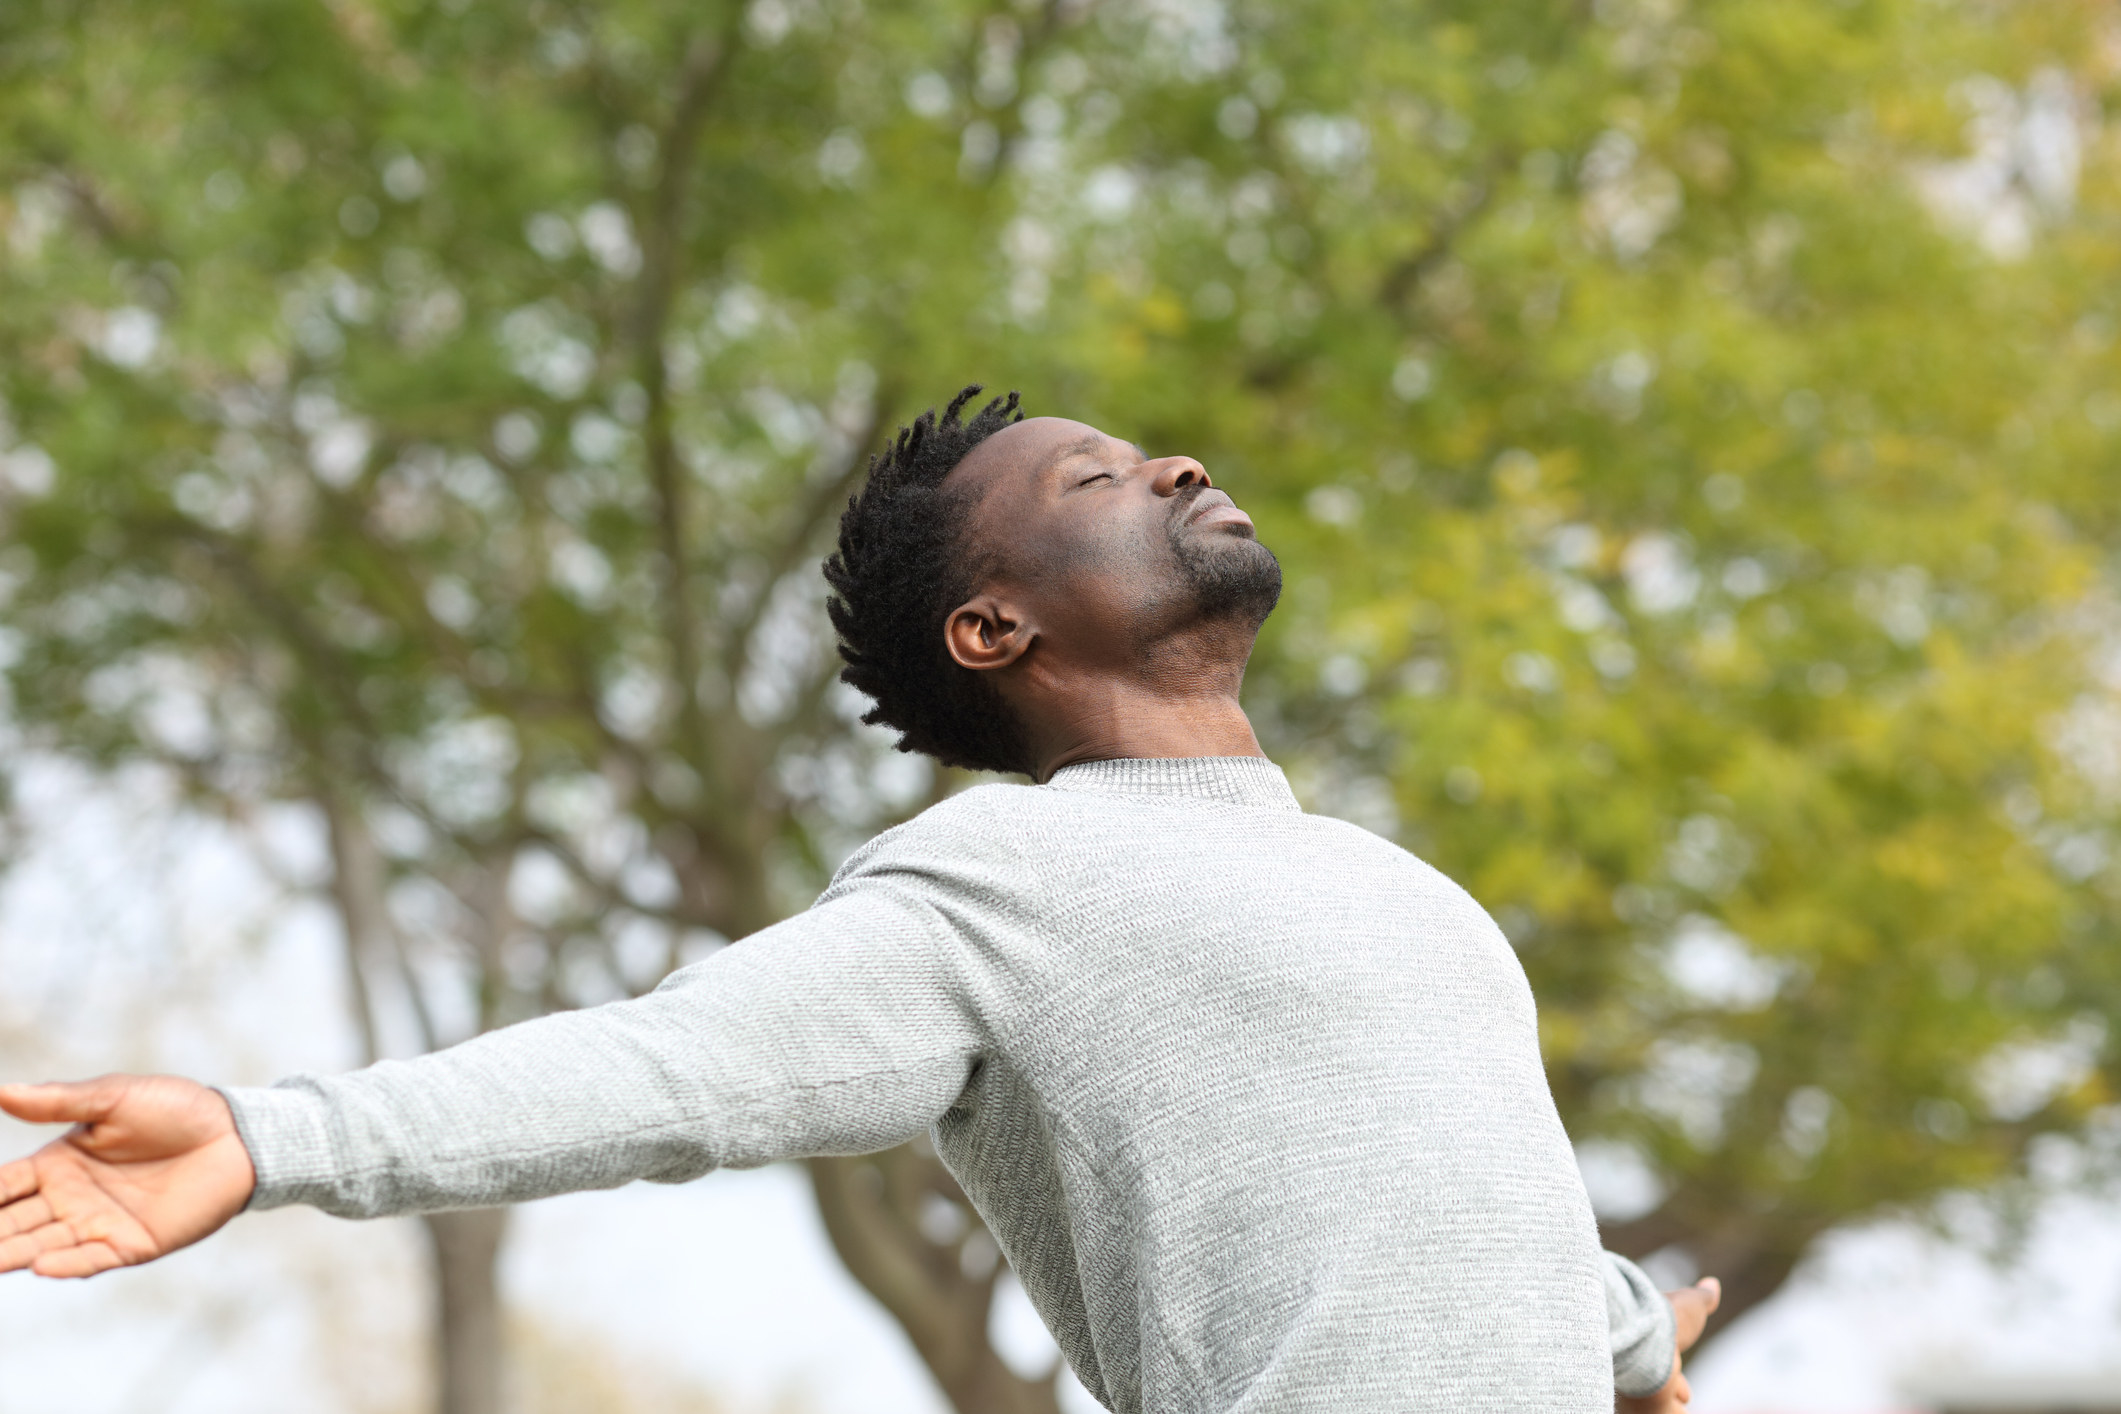 A man stands in a park, breathing deeply while stretching.